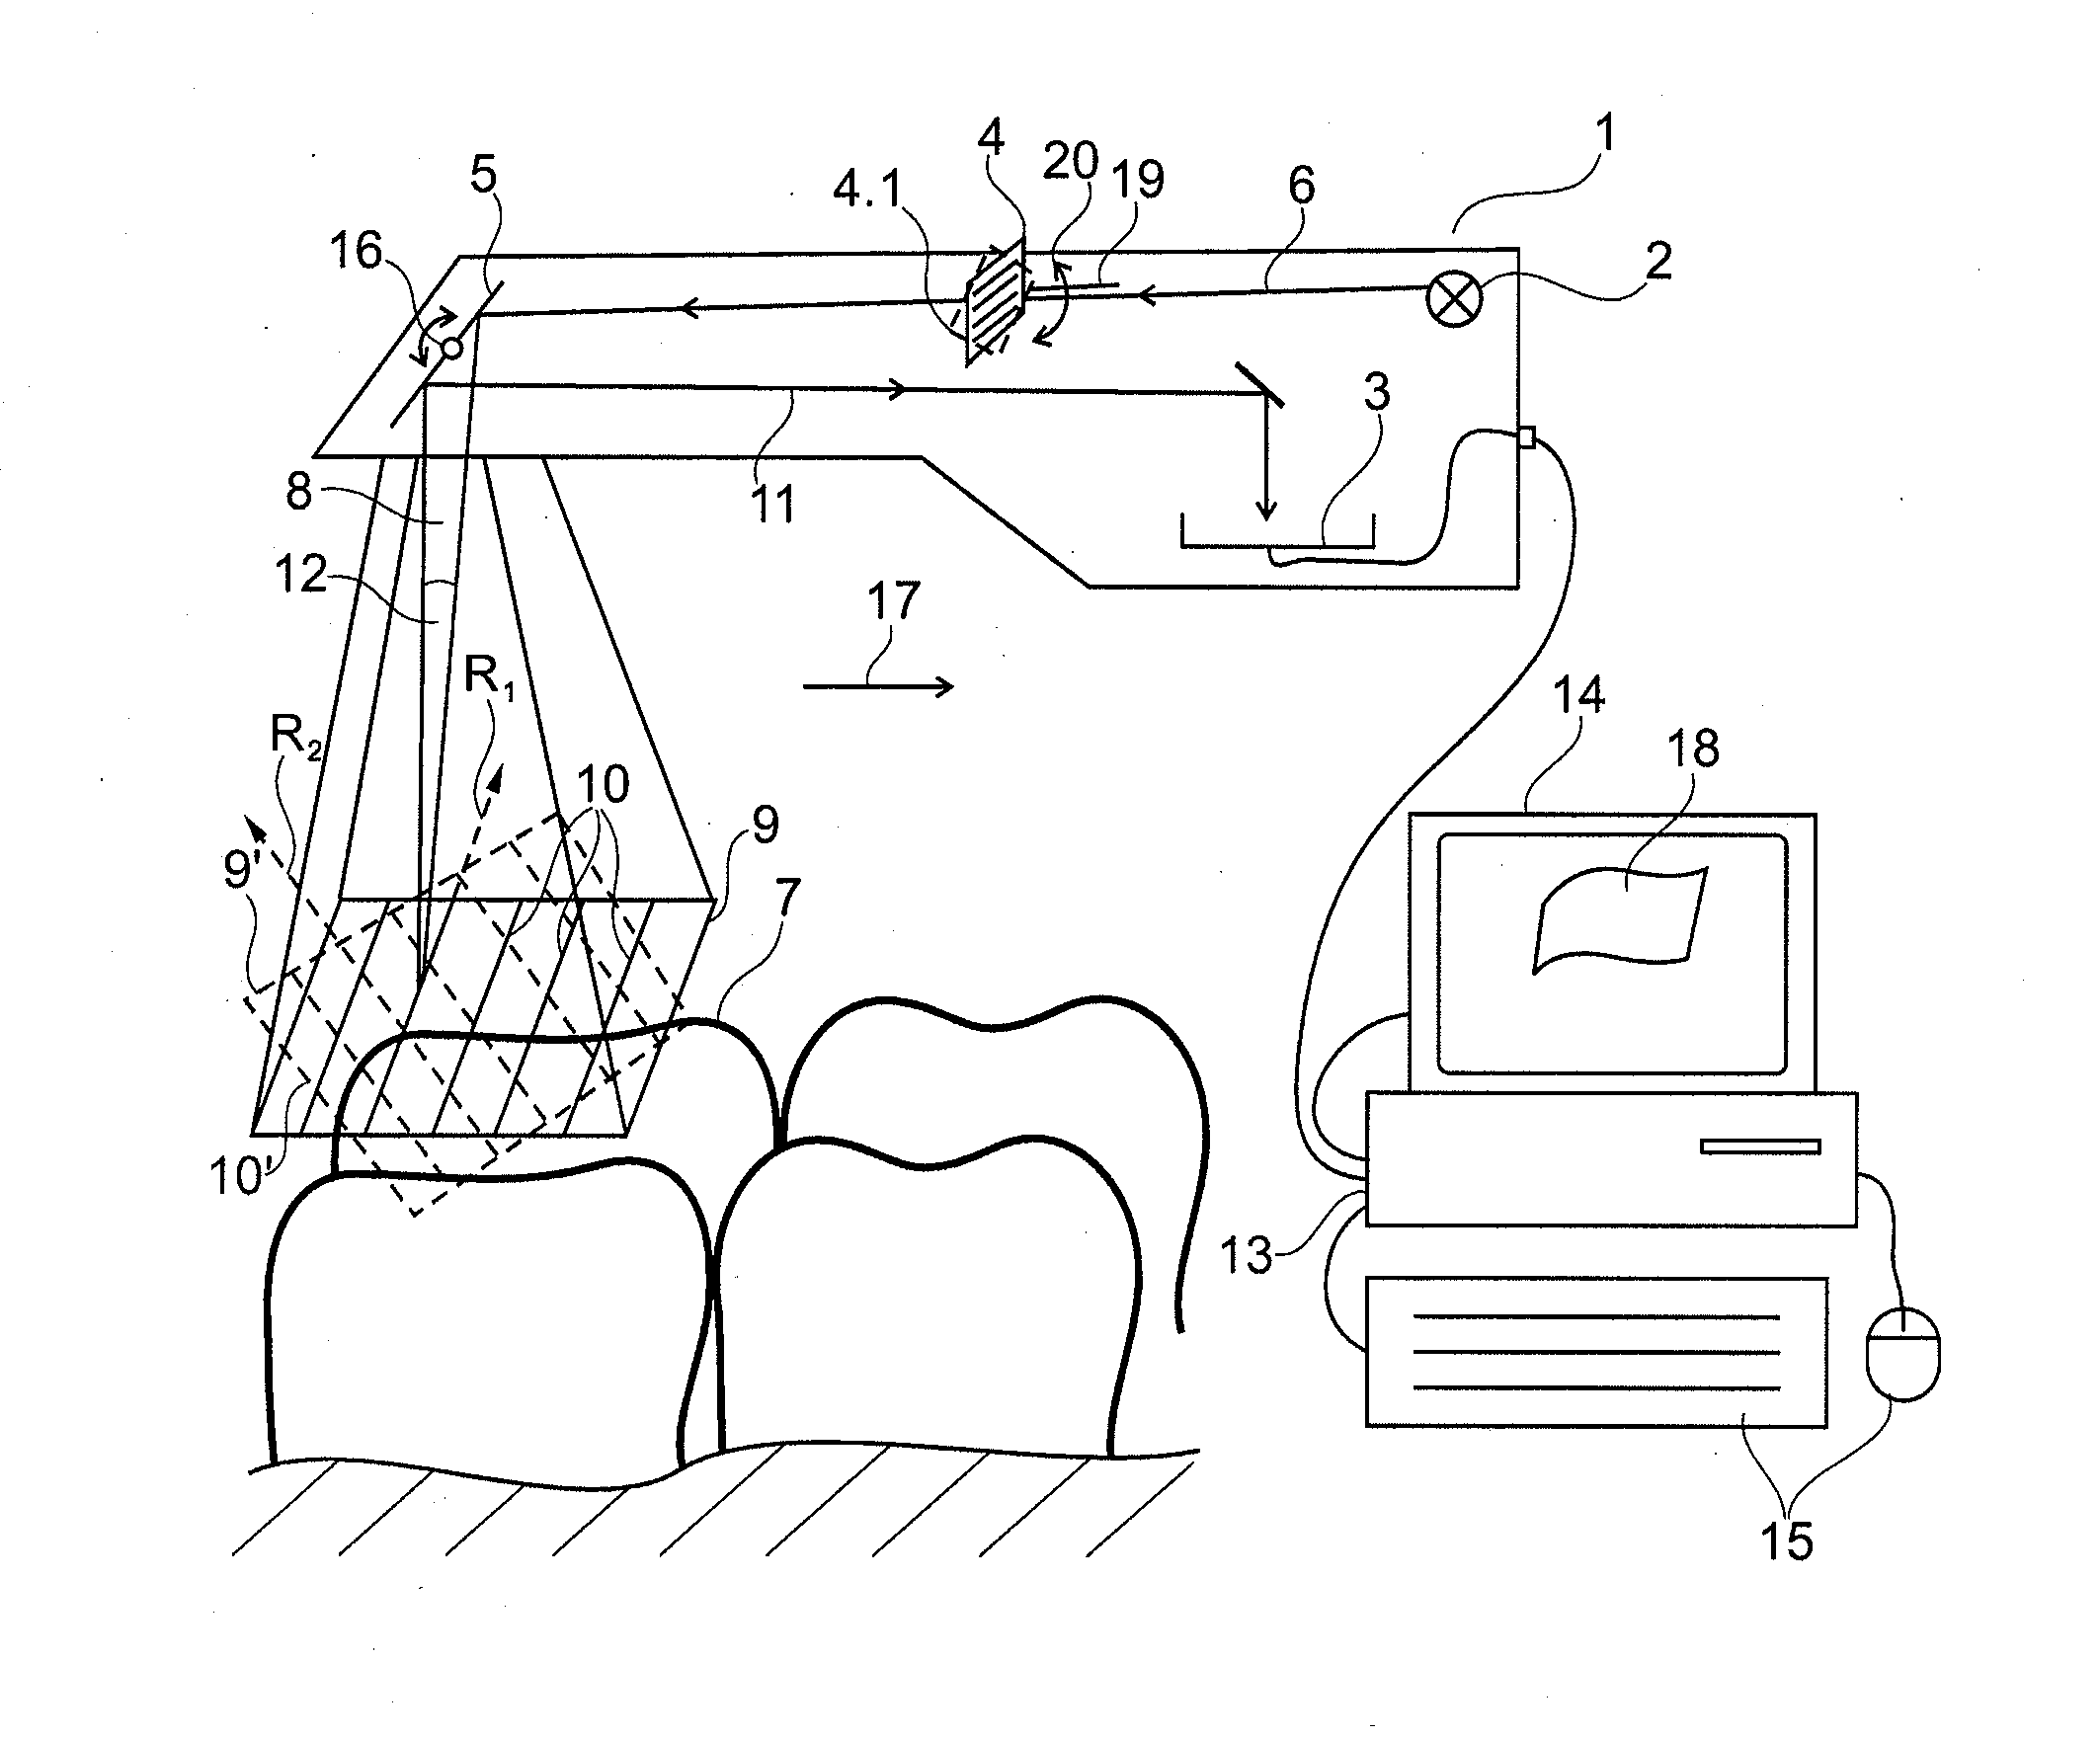 Method for optical measurement of the three dimensional geometry of objects